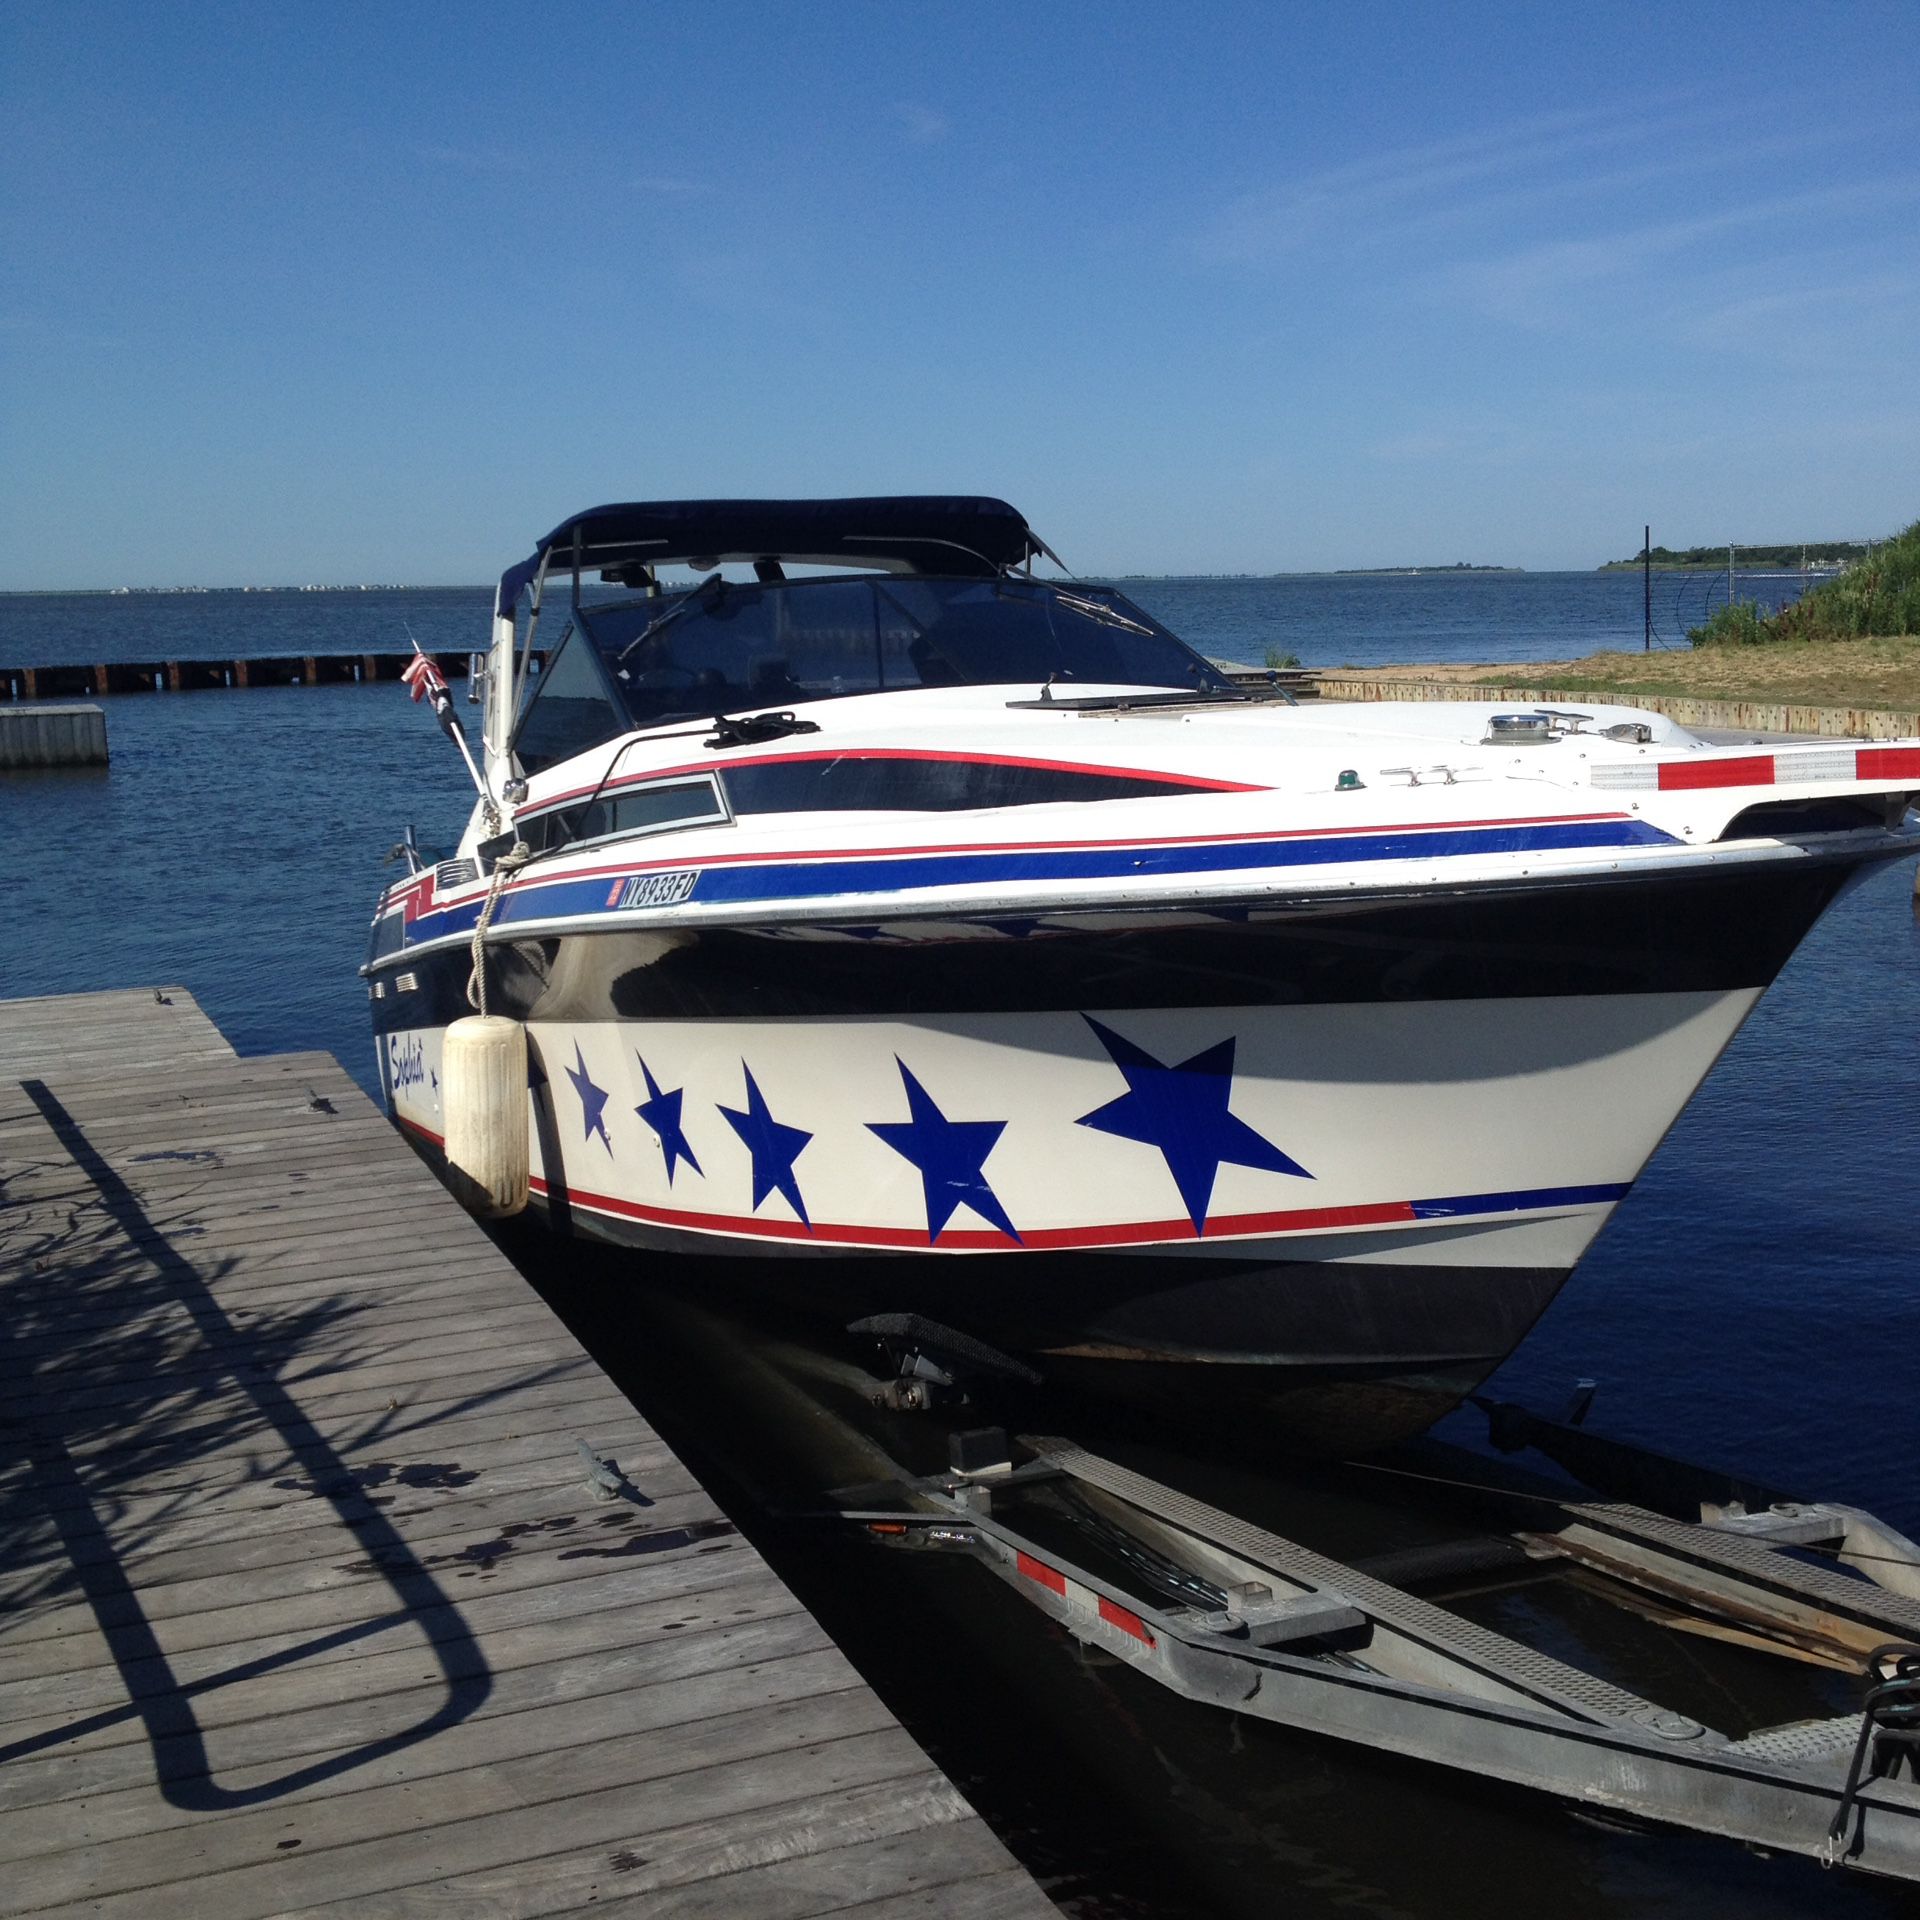 28' Wellcraft Monte Carlo 1988.twin 305 mercruiser I/0's with alpha one water in Lindenhurst ny and includes dockage for rest of season and